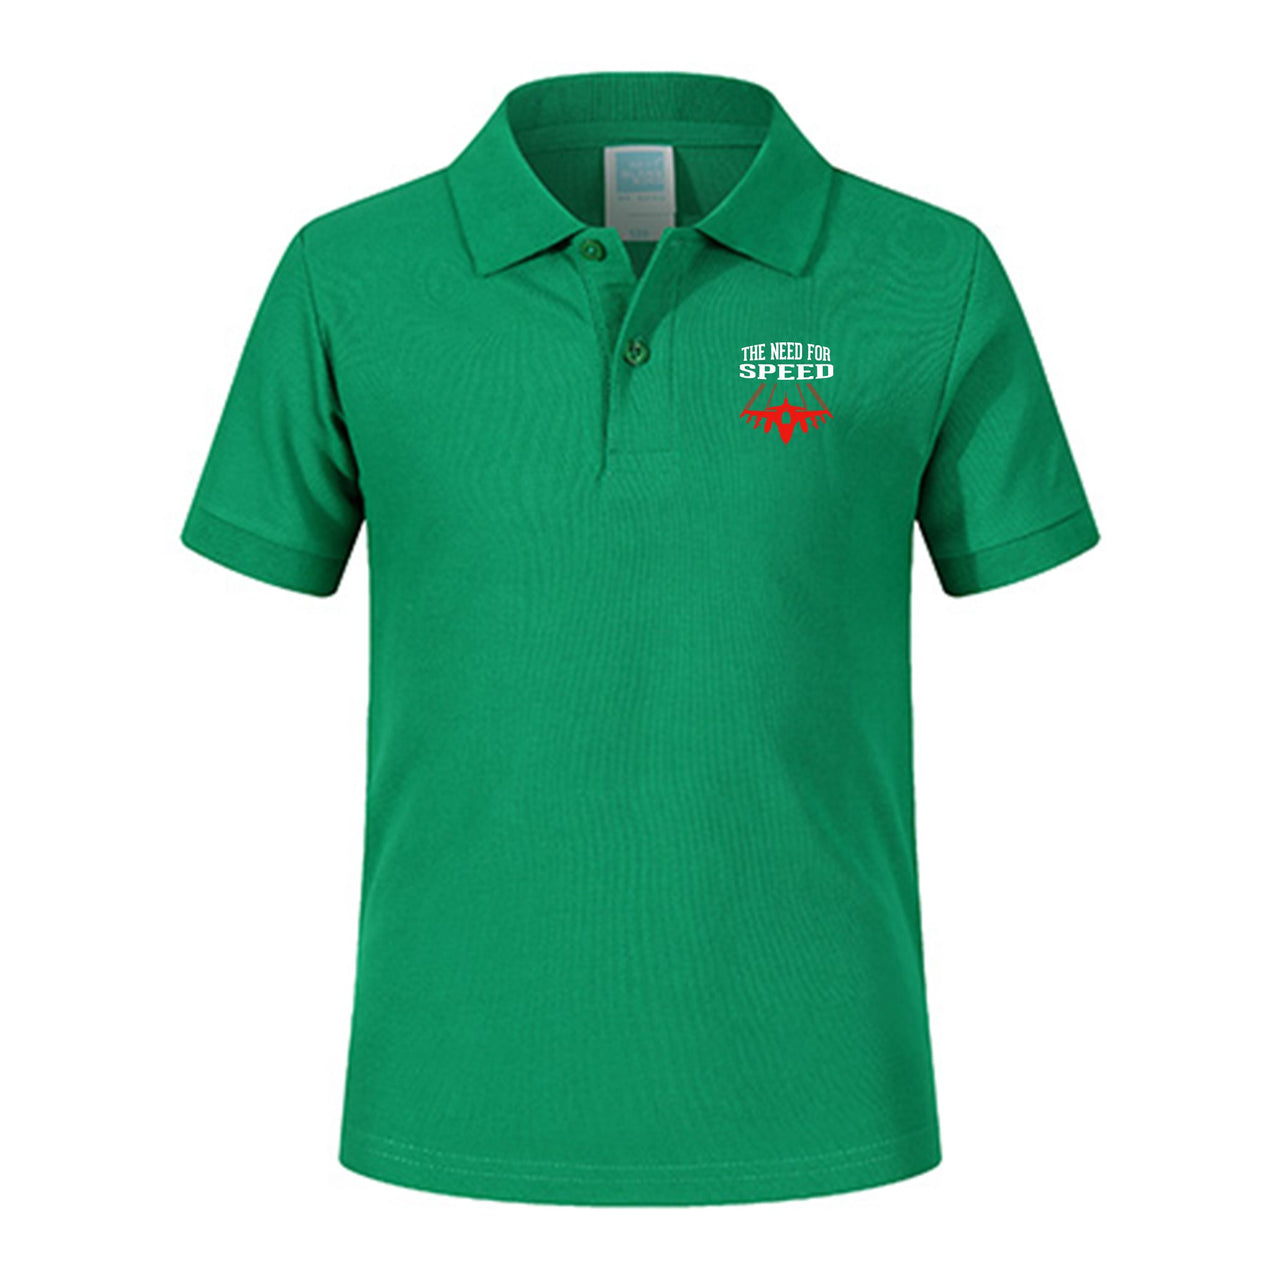 The Need For Speed Designed Children Polo T-Shirts